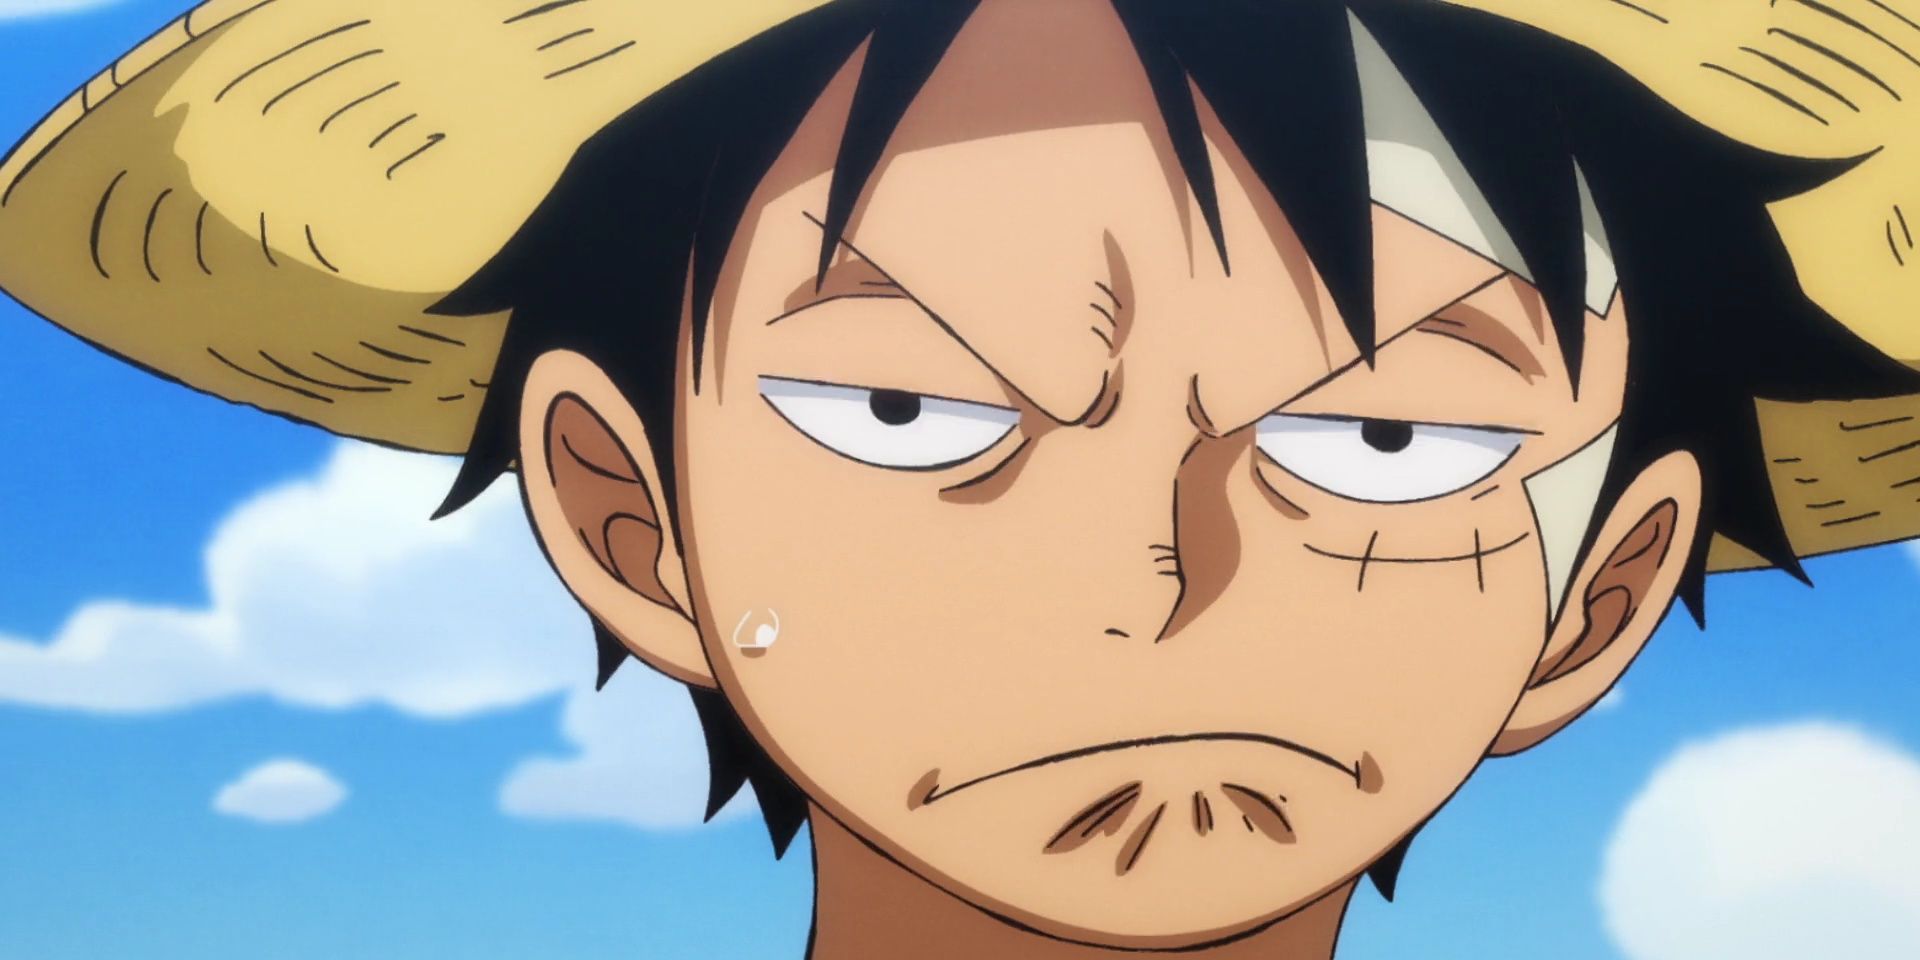 The image features a close-up of Luffy looking annoyed from Toei's One Piece anime.